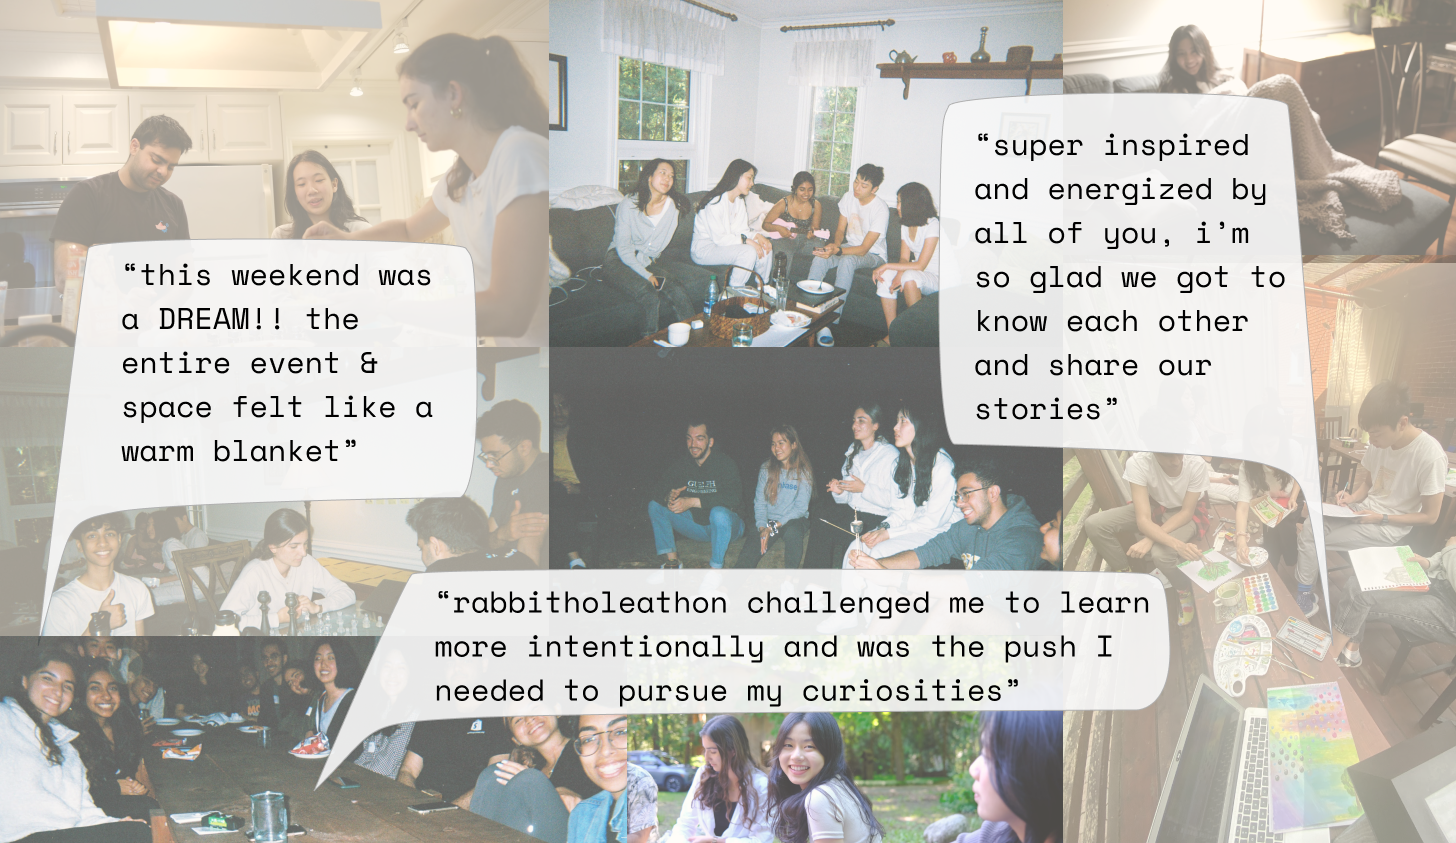 testimonials: this weekend was a dream, “this weekend was a DREAM!! the entire event & space felt like a warm blanket”, i'm so glad we got to know each other and share our stories”, “rabbitholeathon challenged me to learn more intentionally and was the push I needed to pursue my curiosities”